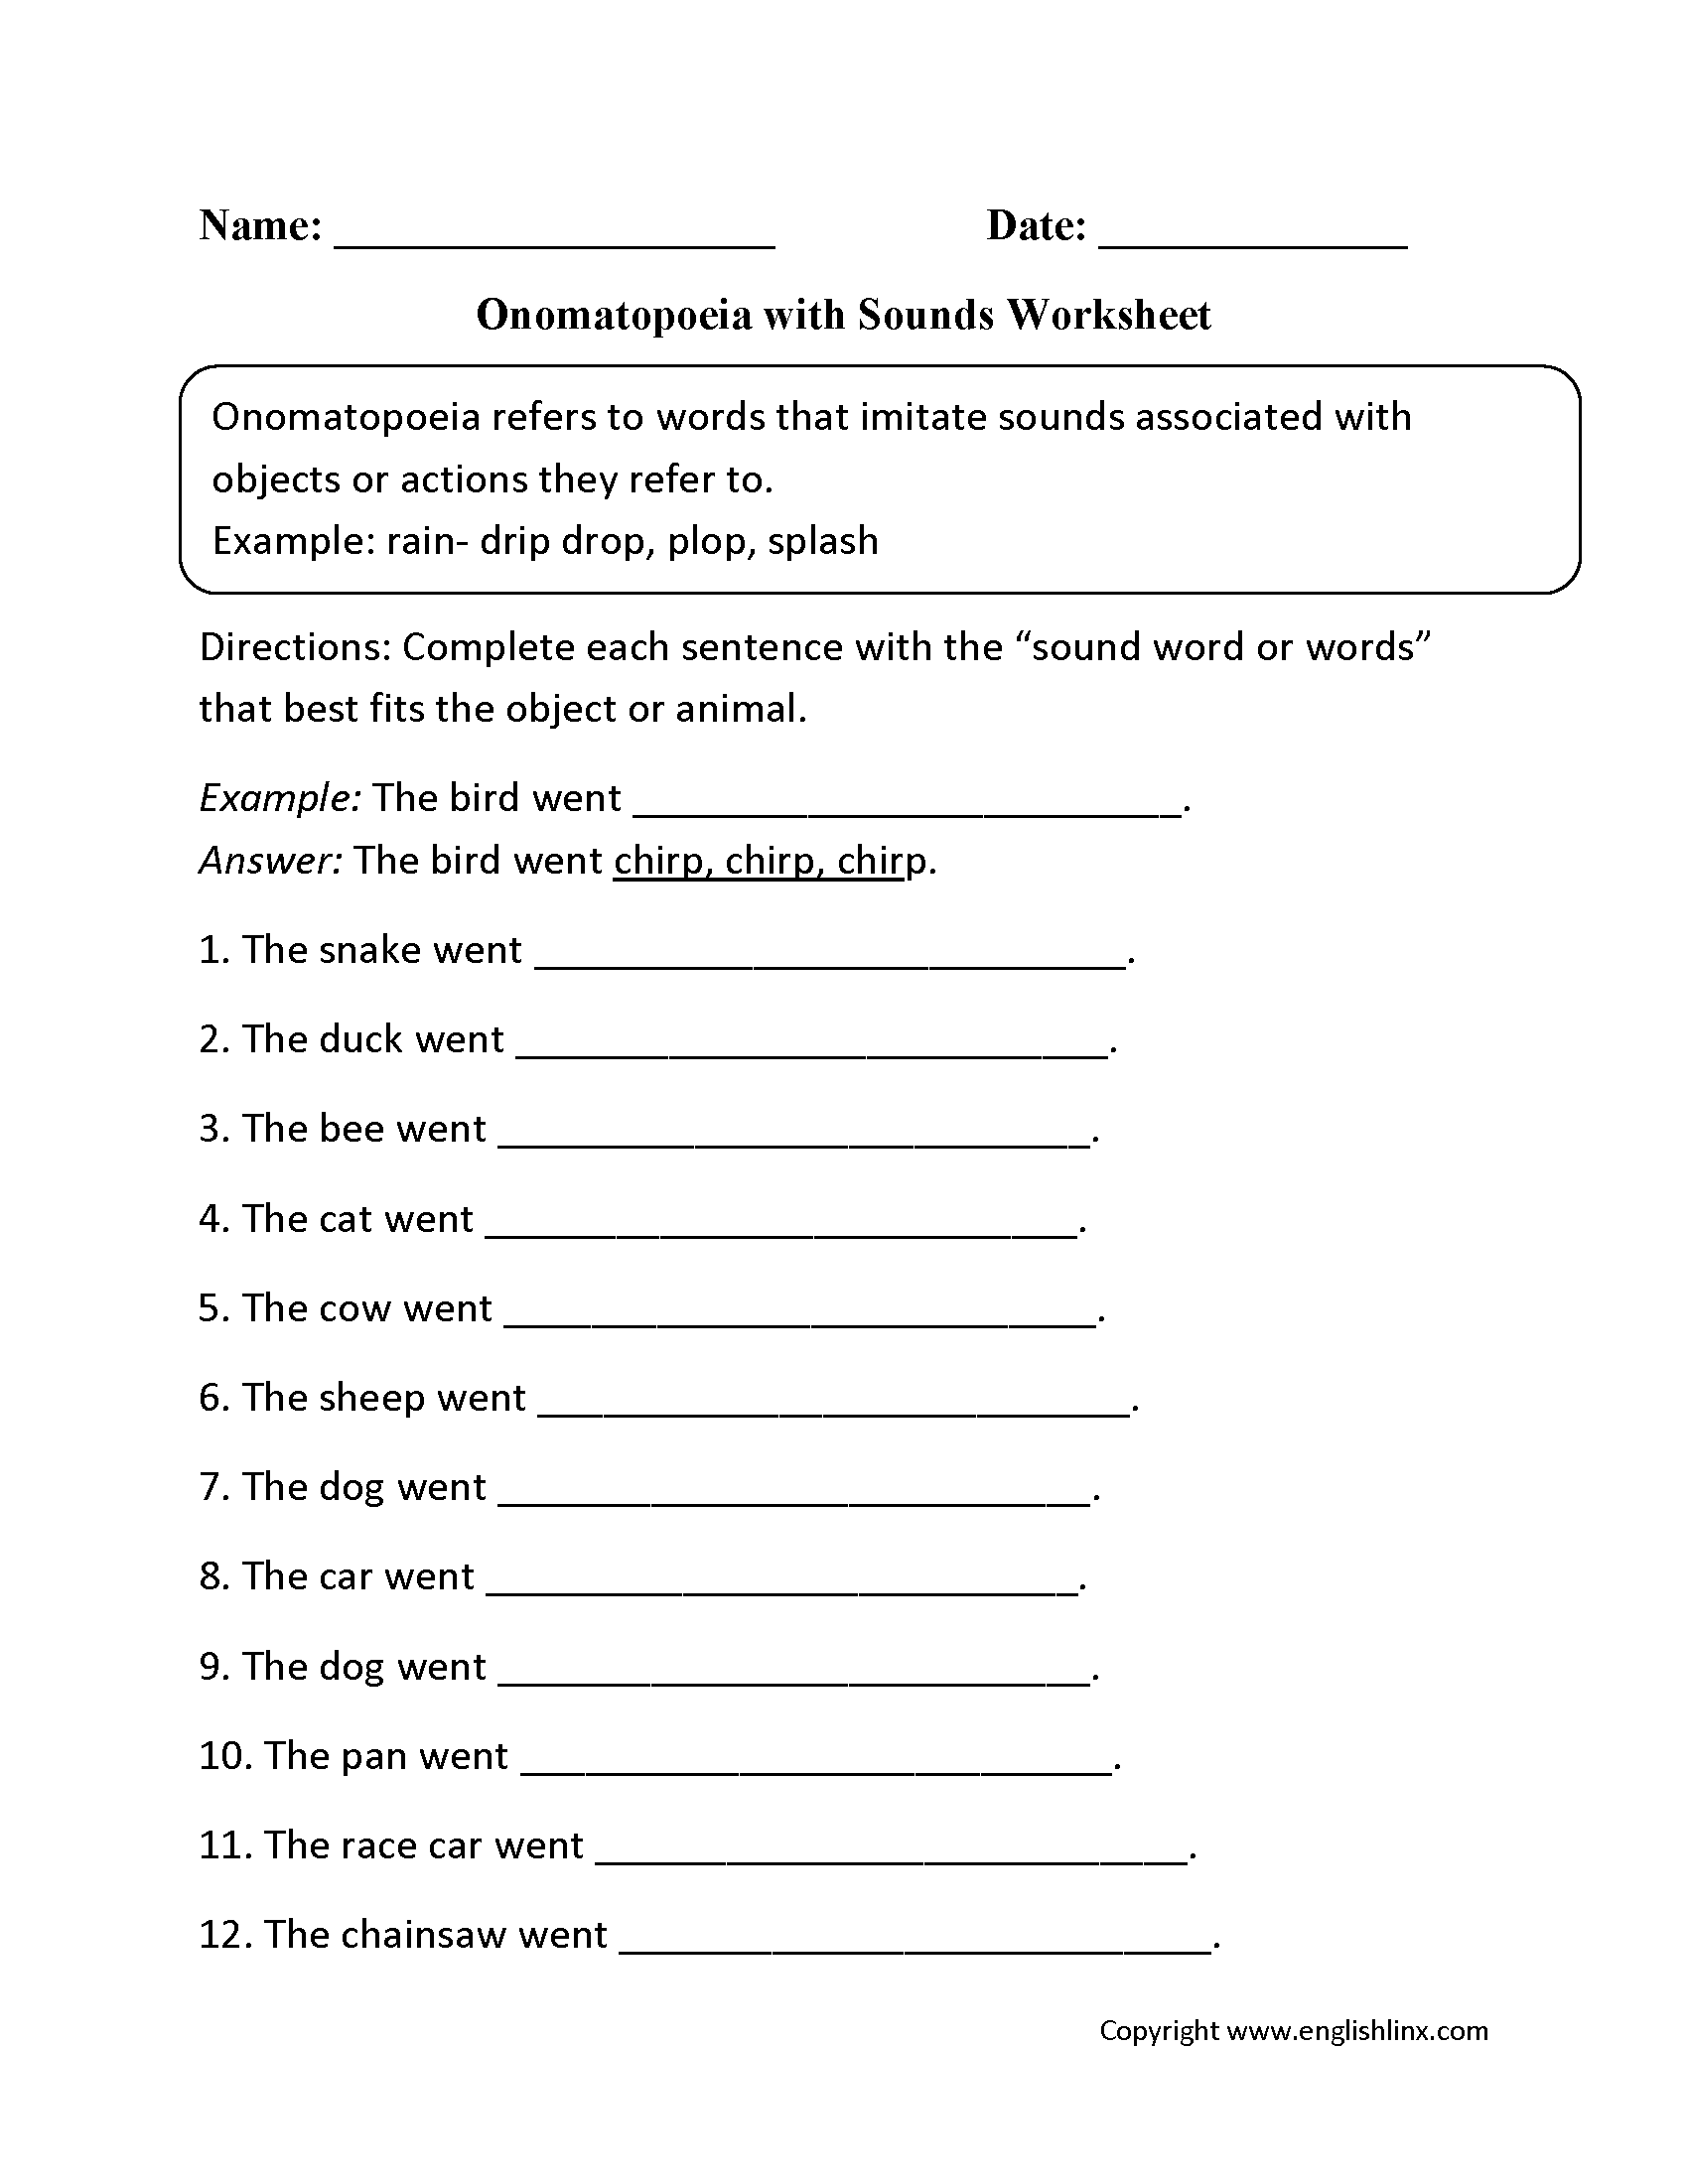 Onomatopoeia with Sounds Worksheets